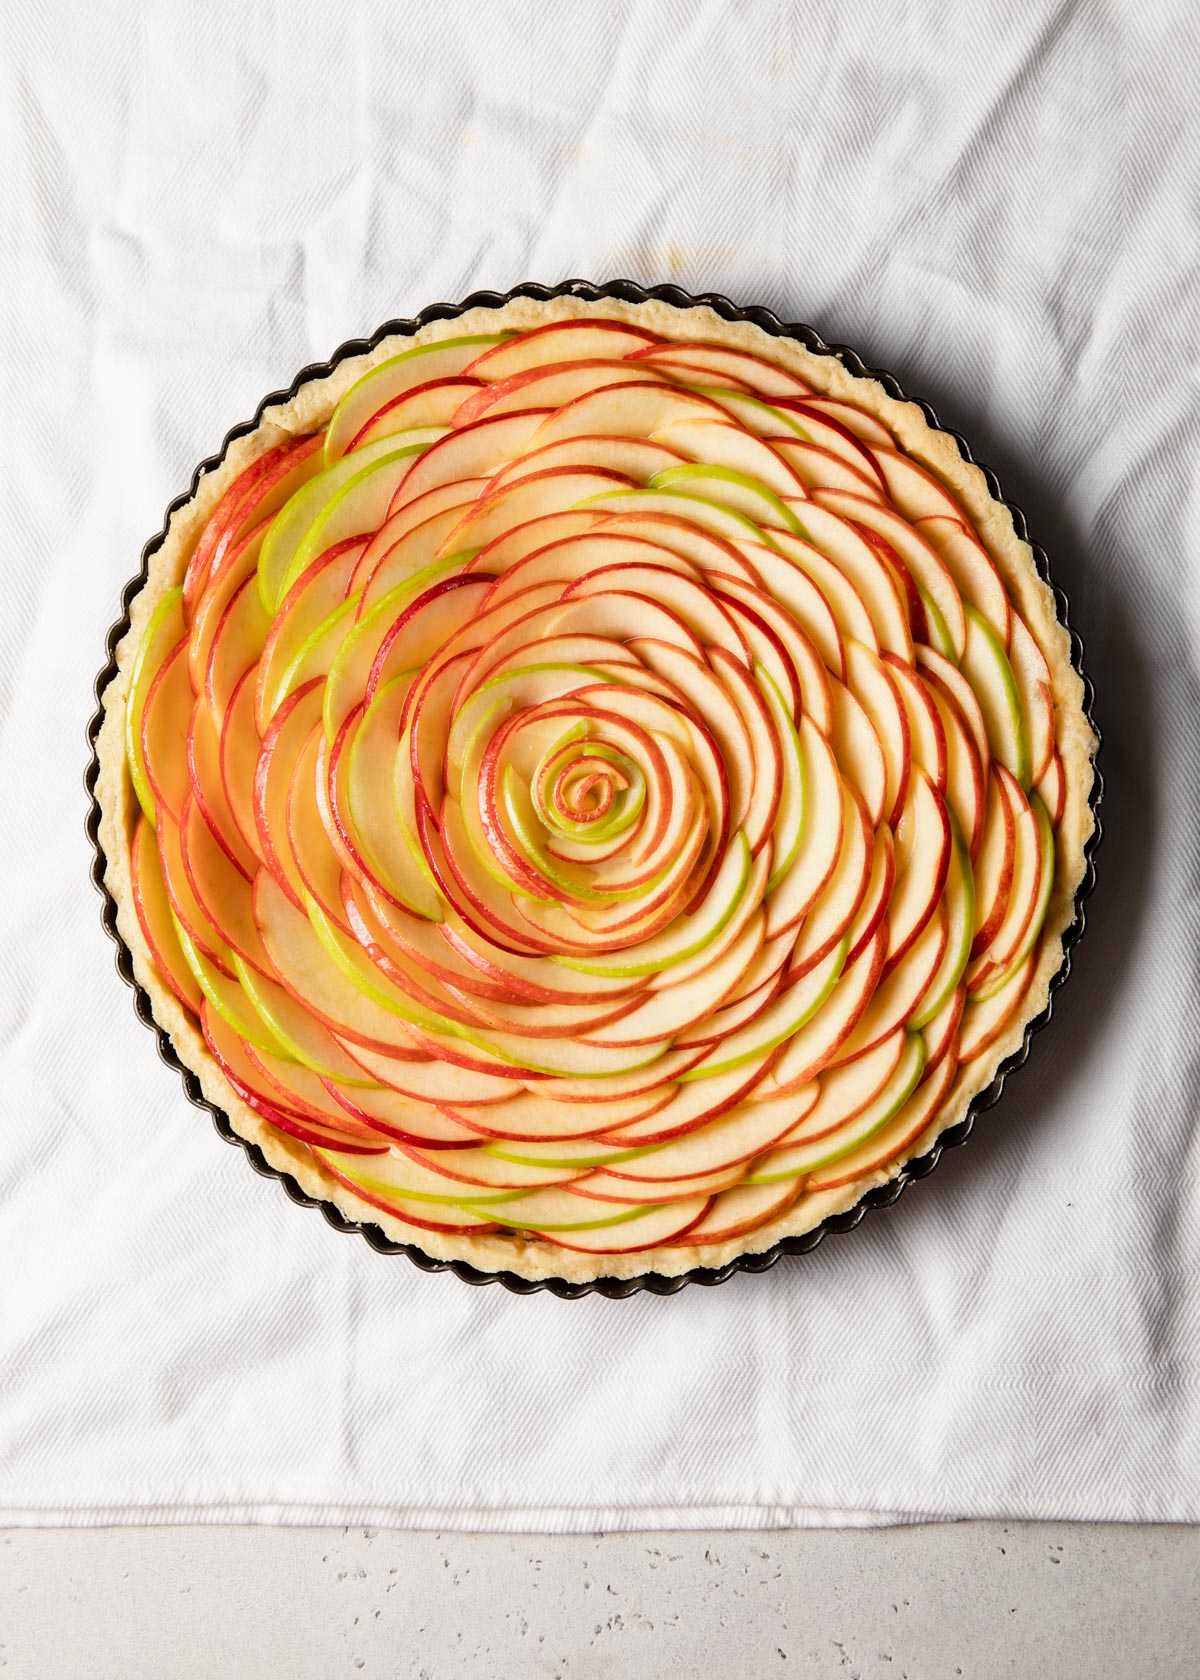 An apple rose tart in a pan ready to be baked